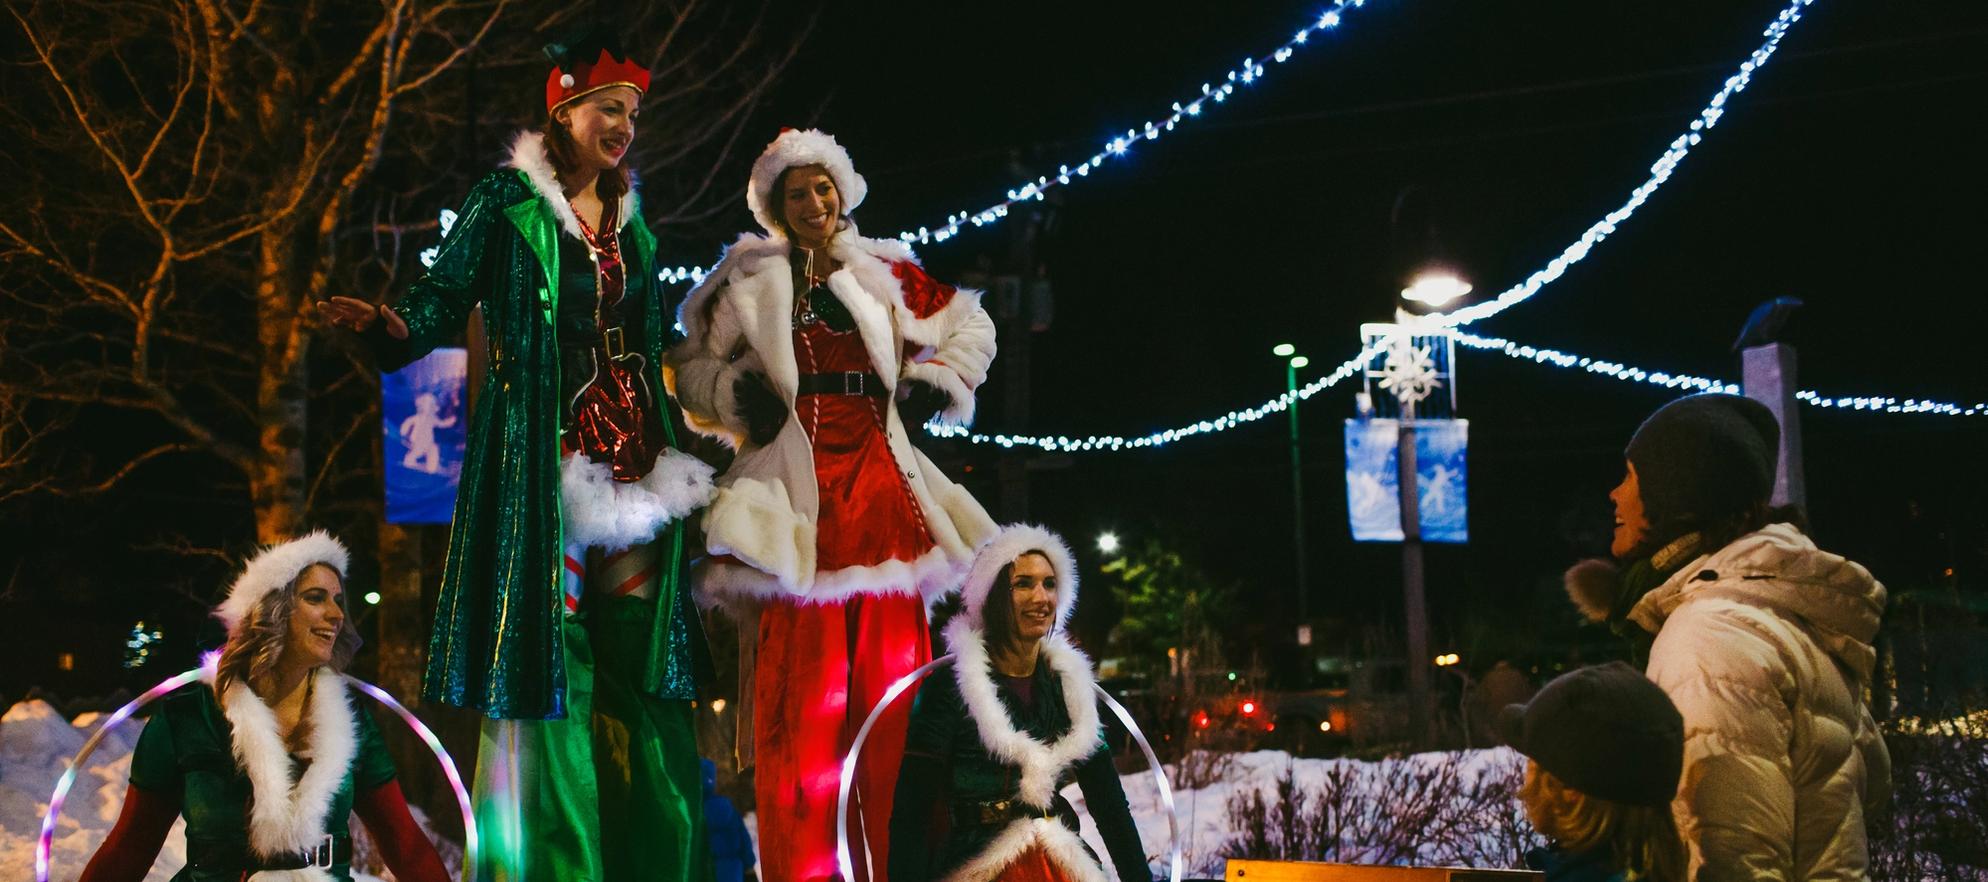 A family watches christmas themed stilt walkers in Banff for the Santa Claus Celebration of Lights